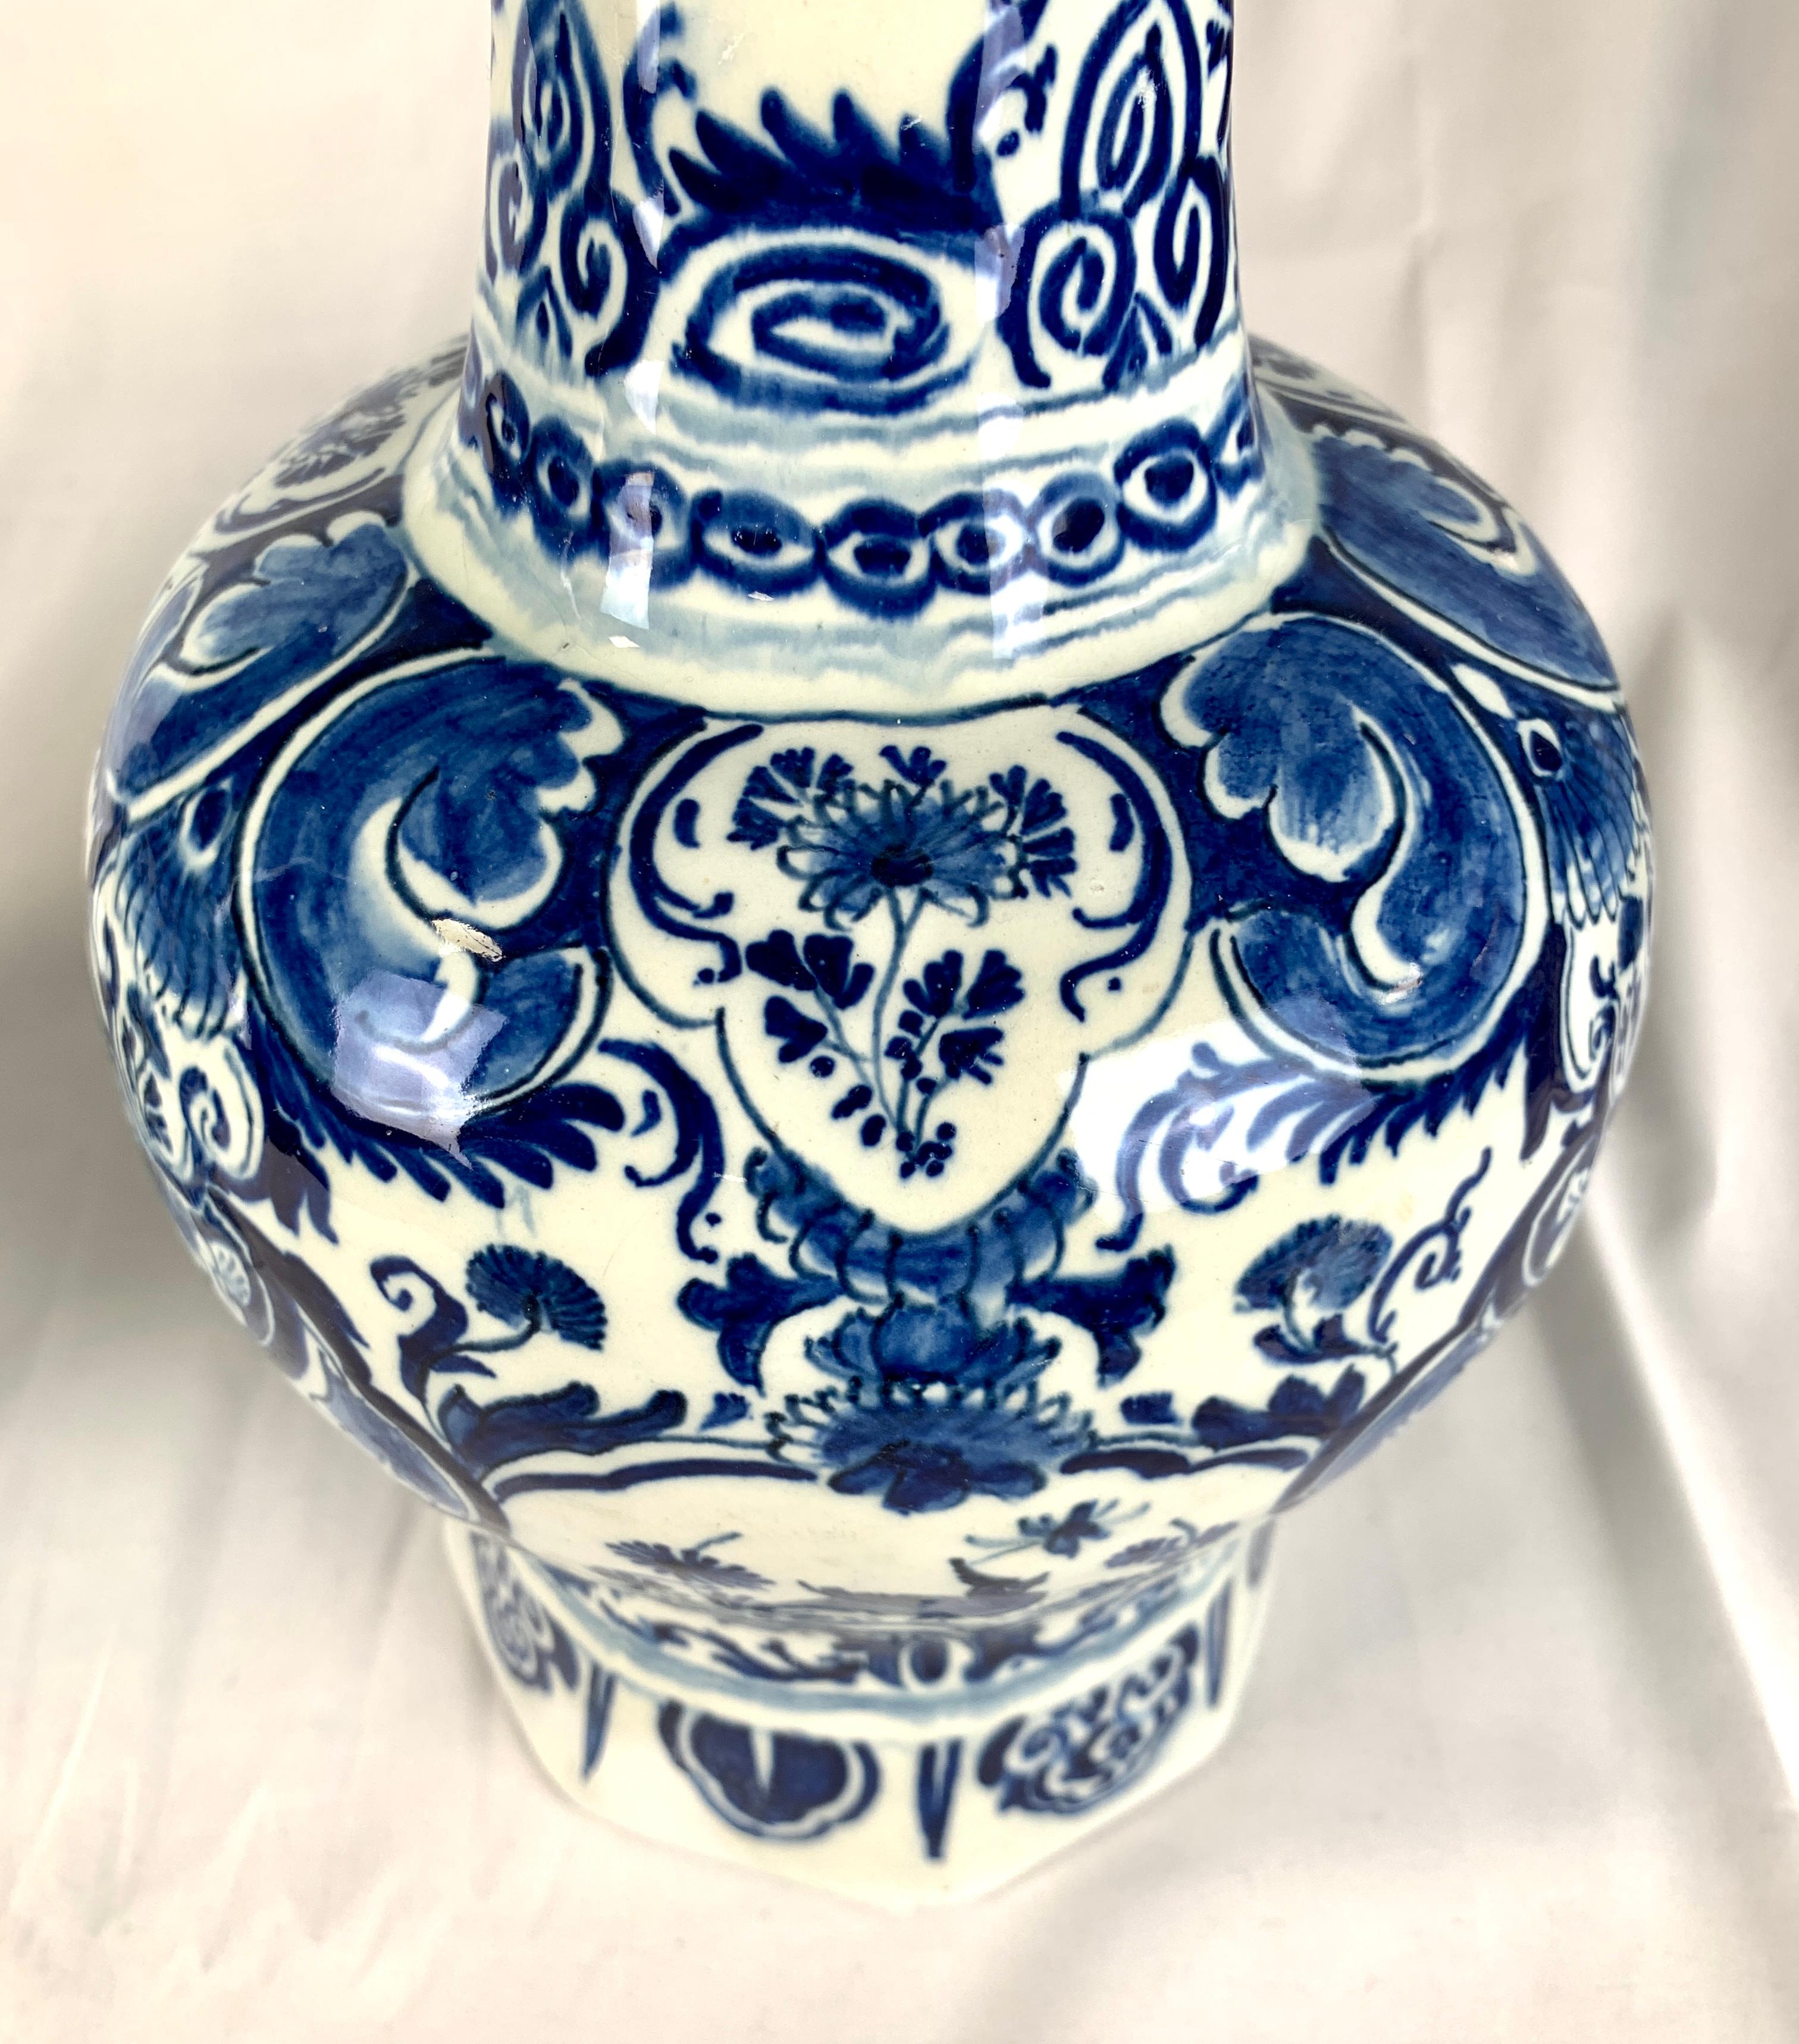 Rococo Pair Blue and White Delft Vases Hand Painted 18th Century circa 1770 Netherlands